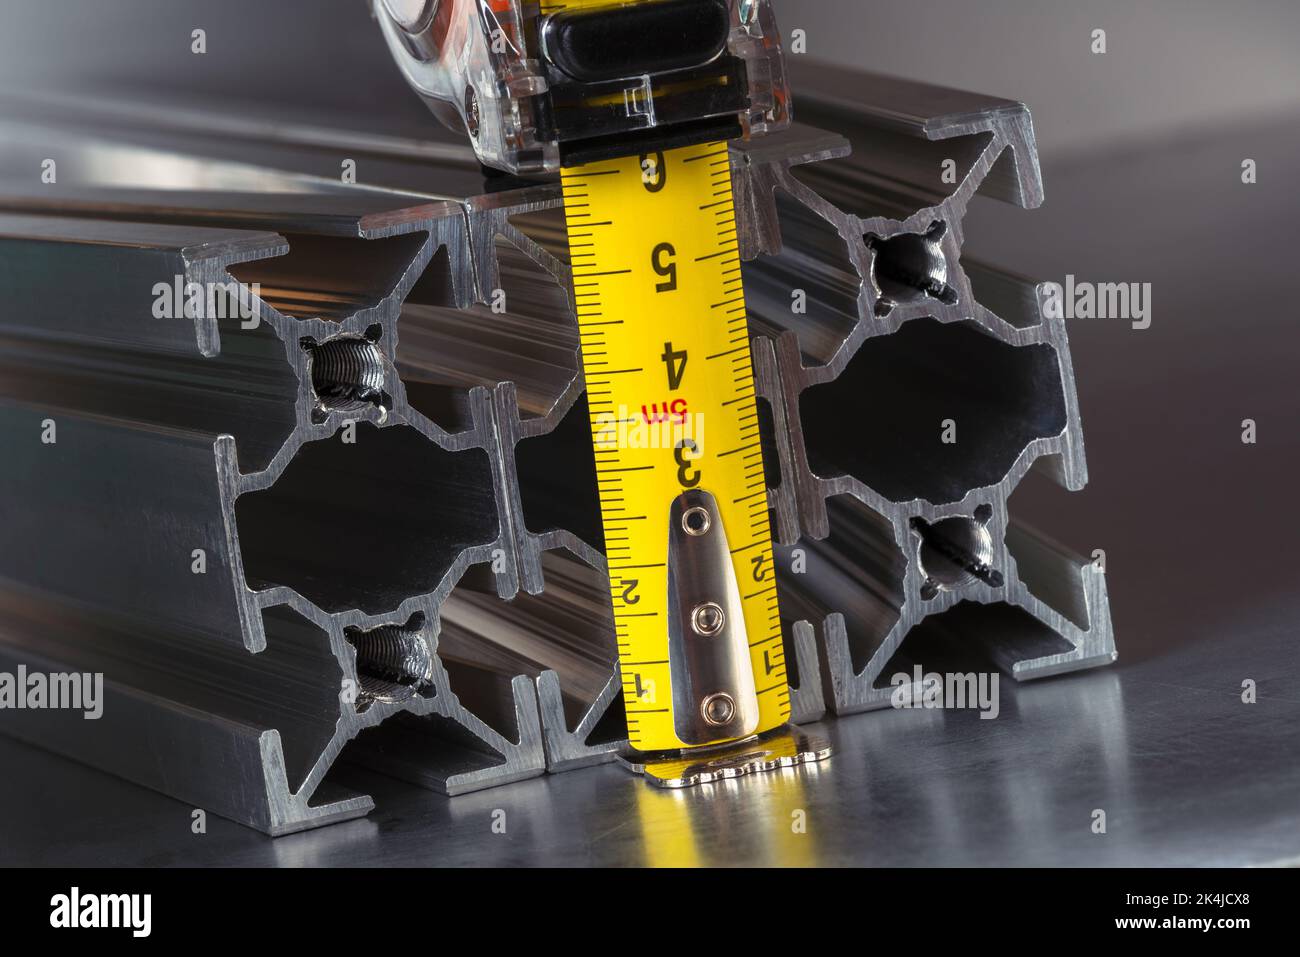 Measuring tape with metal profiles close-up, tool and component of construction industry Stock Photo